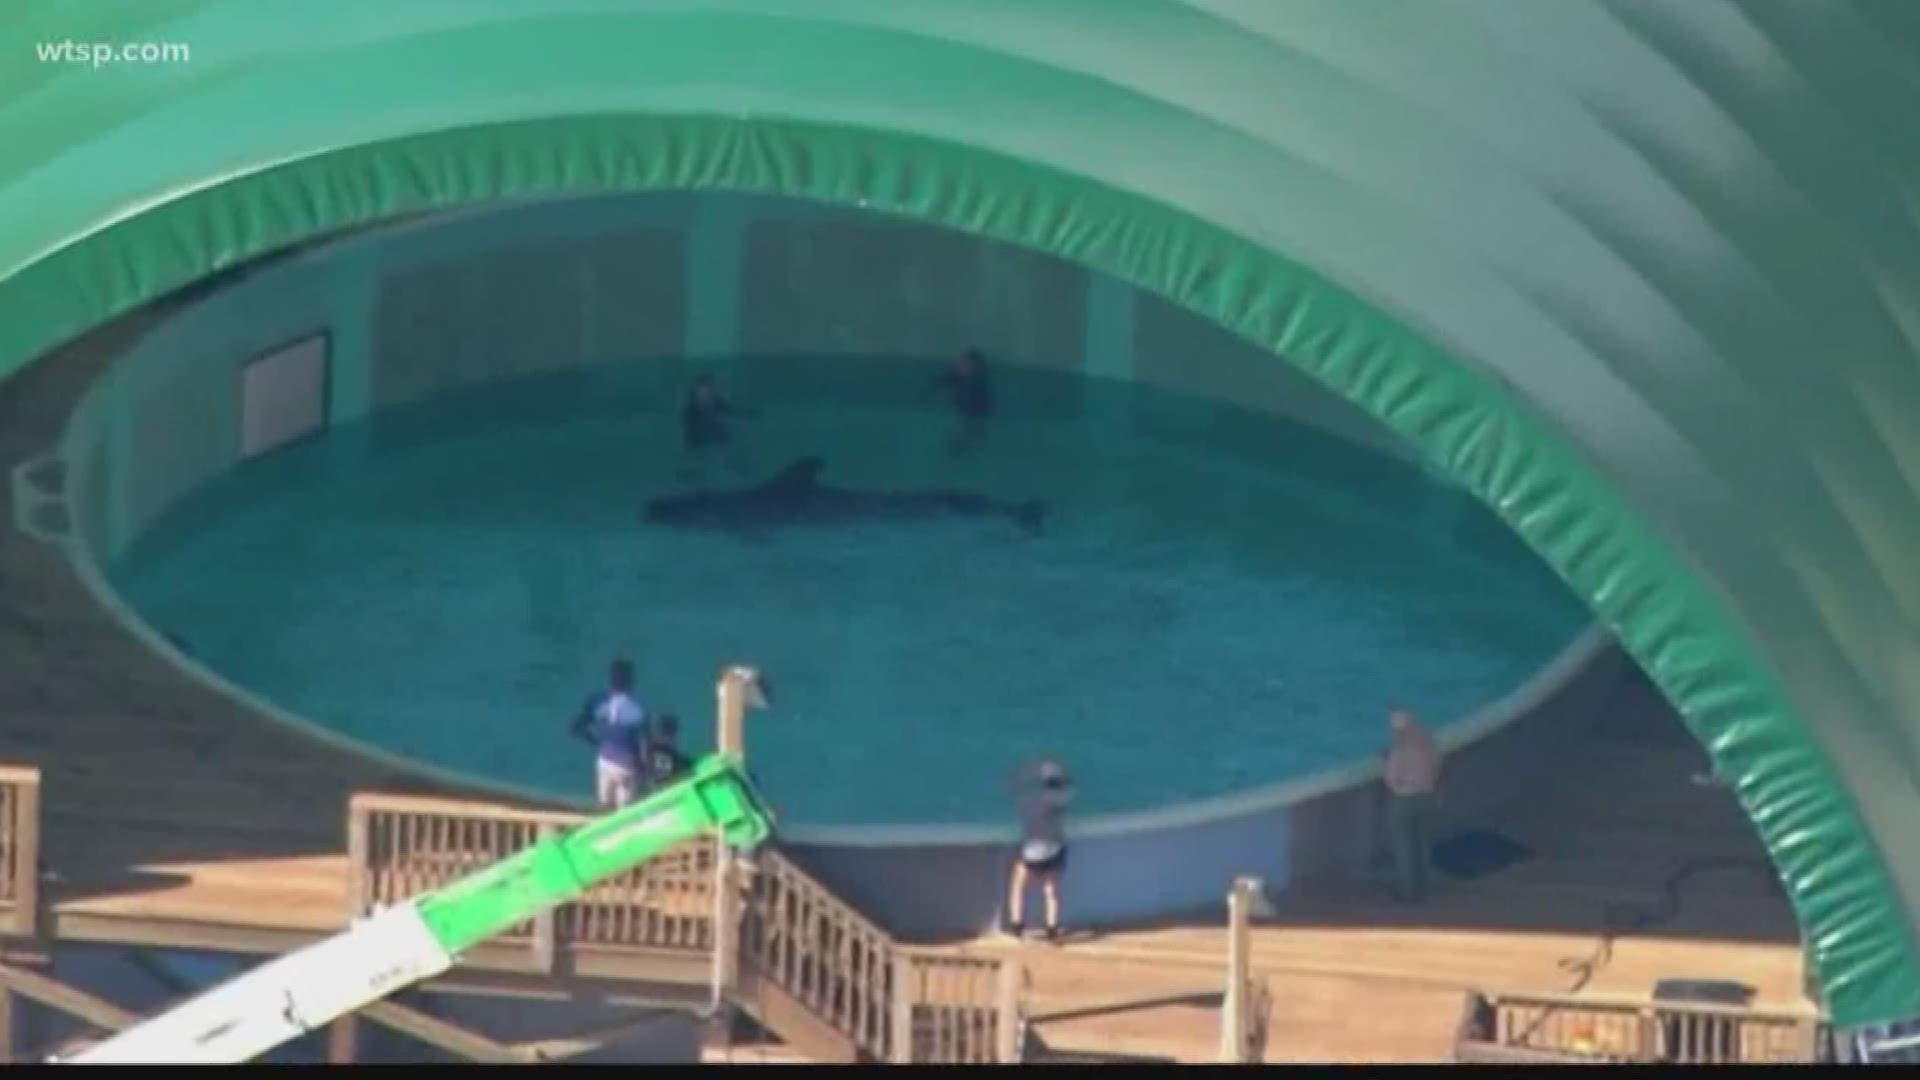 Three pilot whales who were rescued after being stranded on Redington Beach are continuing to head back out to open water, Clearwater Marine Aquarium said Wednesday.

Five whales had to be rescued Monday after they beached themselves. Dozens of volunteers worked to save the sea mammals. https://on.wtsp.com/2ZlQ3Al